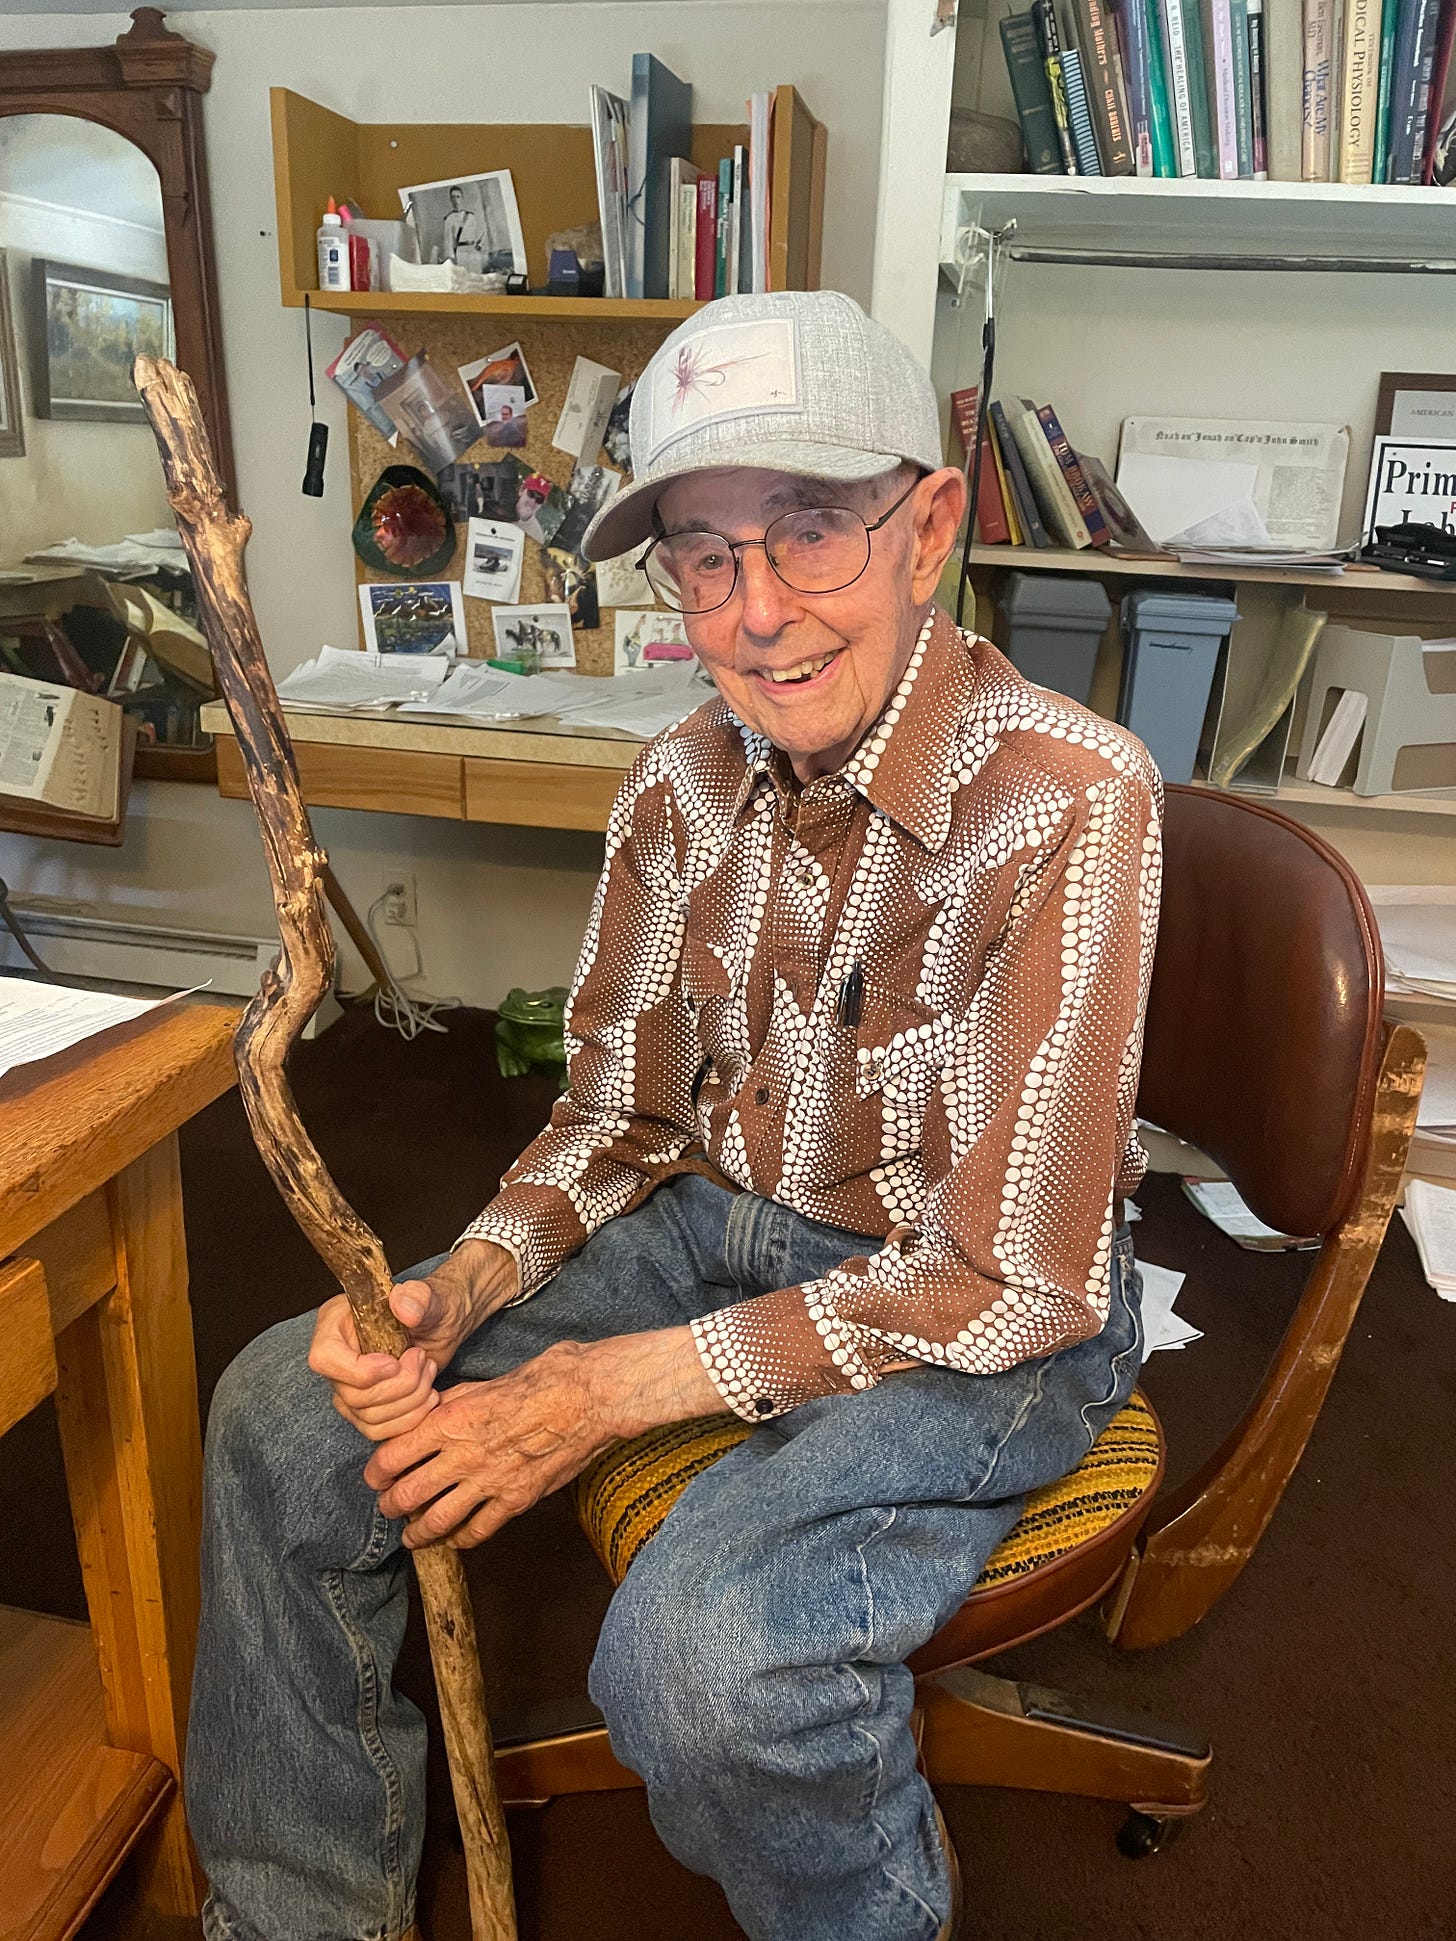 My Dad, Poppa Stu at age 99. He is in a classic 70s brown polkadotted shirt, a fly-fishing hat, and holding a gnarled old walking stick. He is a white man, smiling at the camera, sitting on a brown chair at an office desk with books behind him.